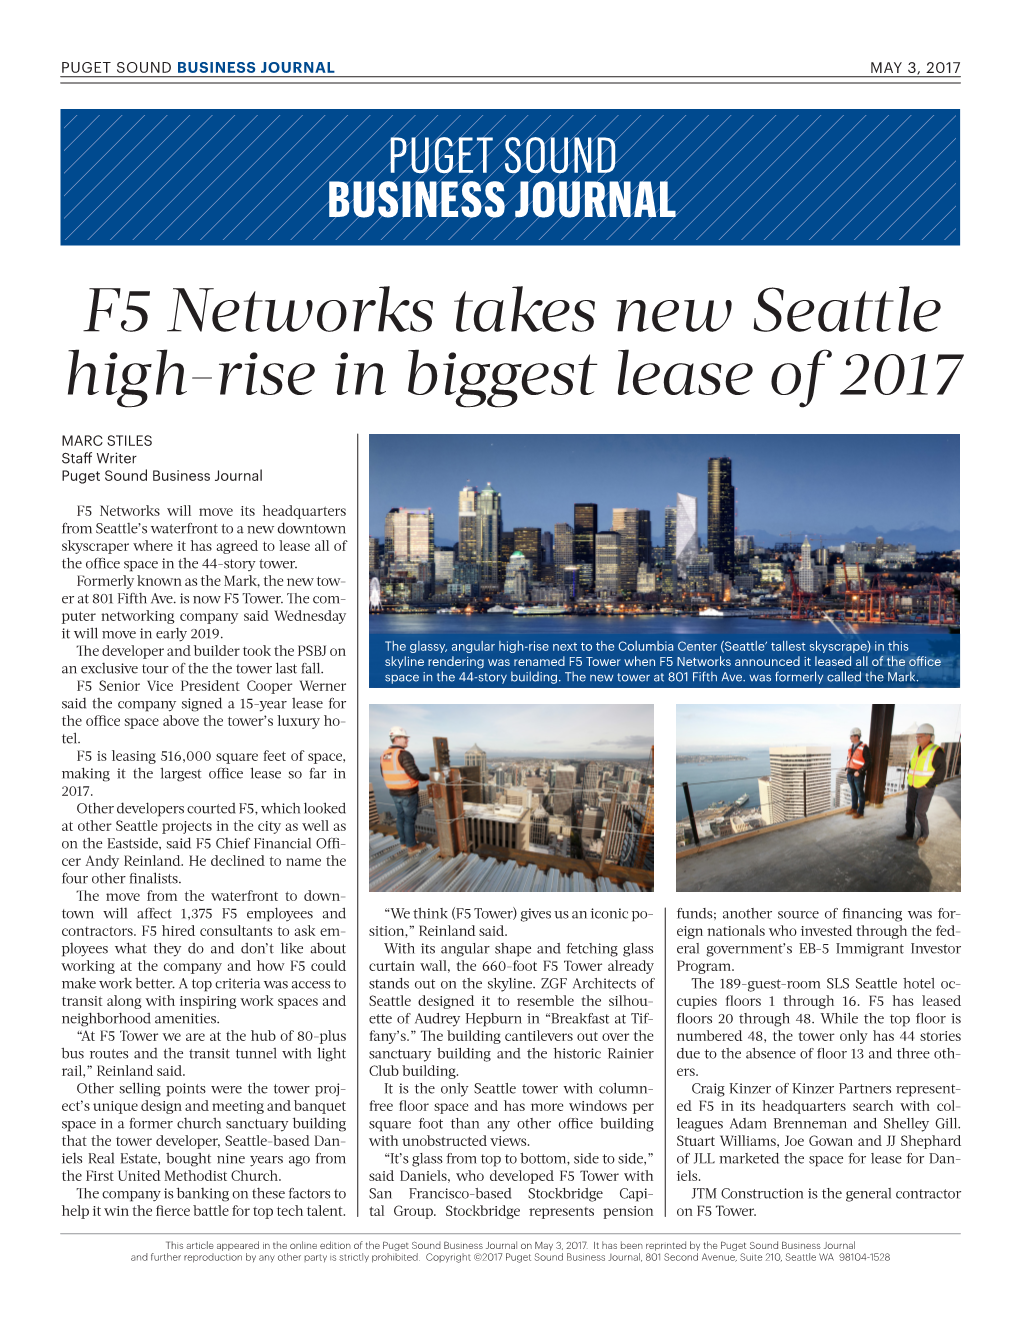 F5 Networks Takes New Seattle High-Rise in Biggest Lease of 2017